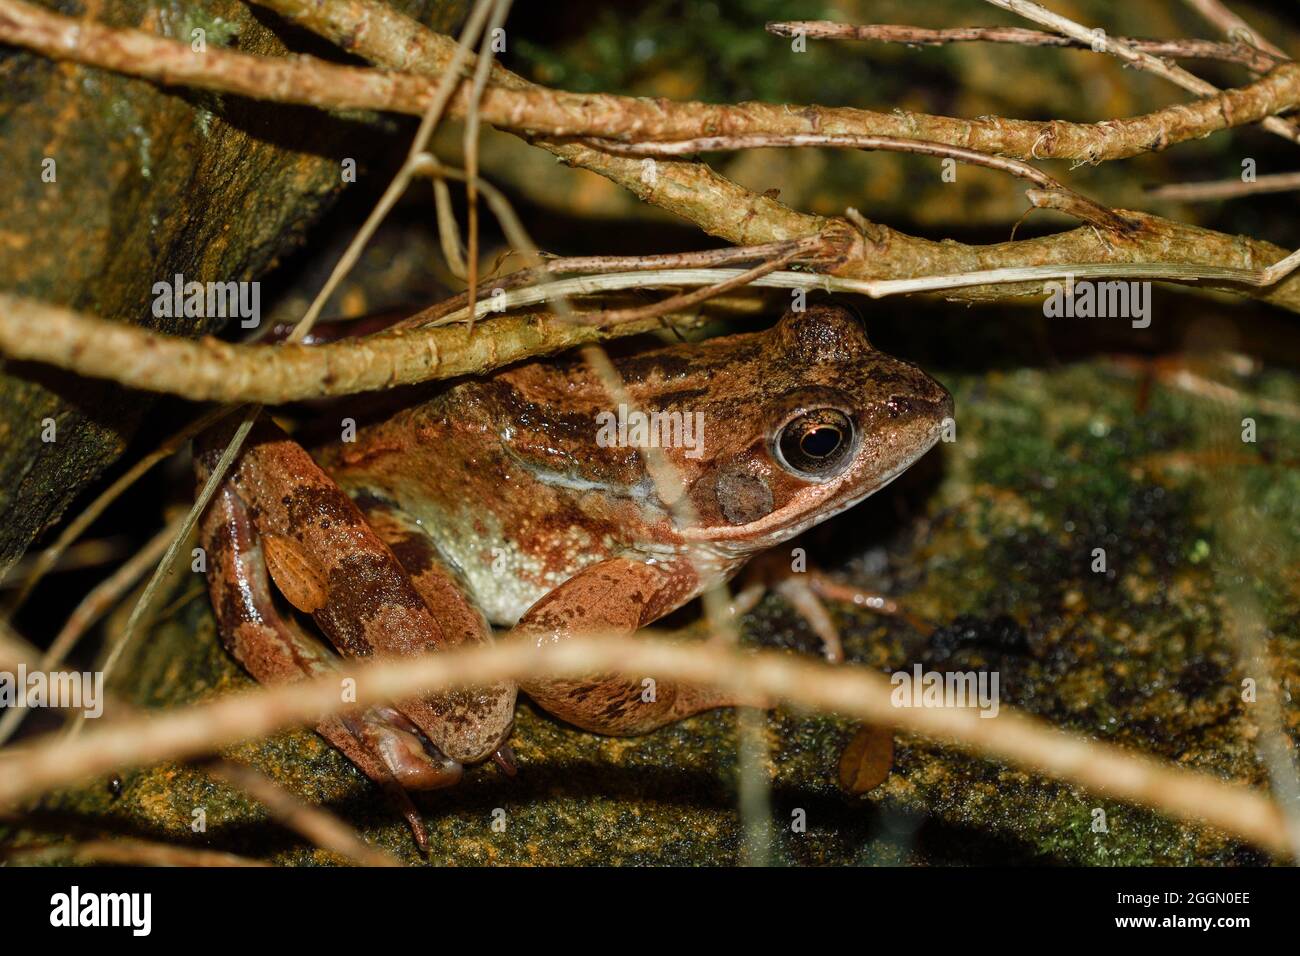 Common frog in its puddle at dusk Stock Photo